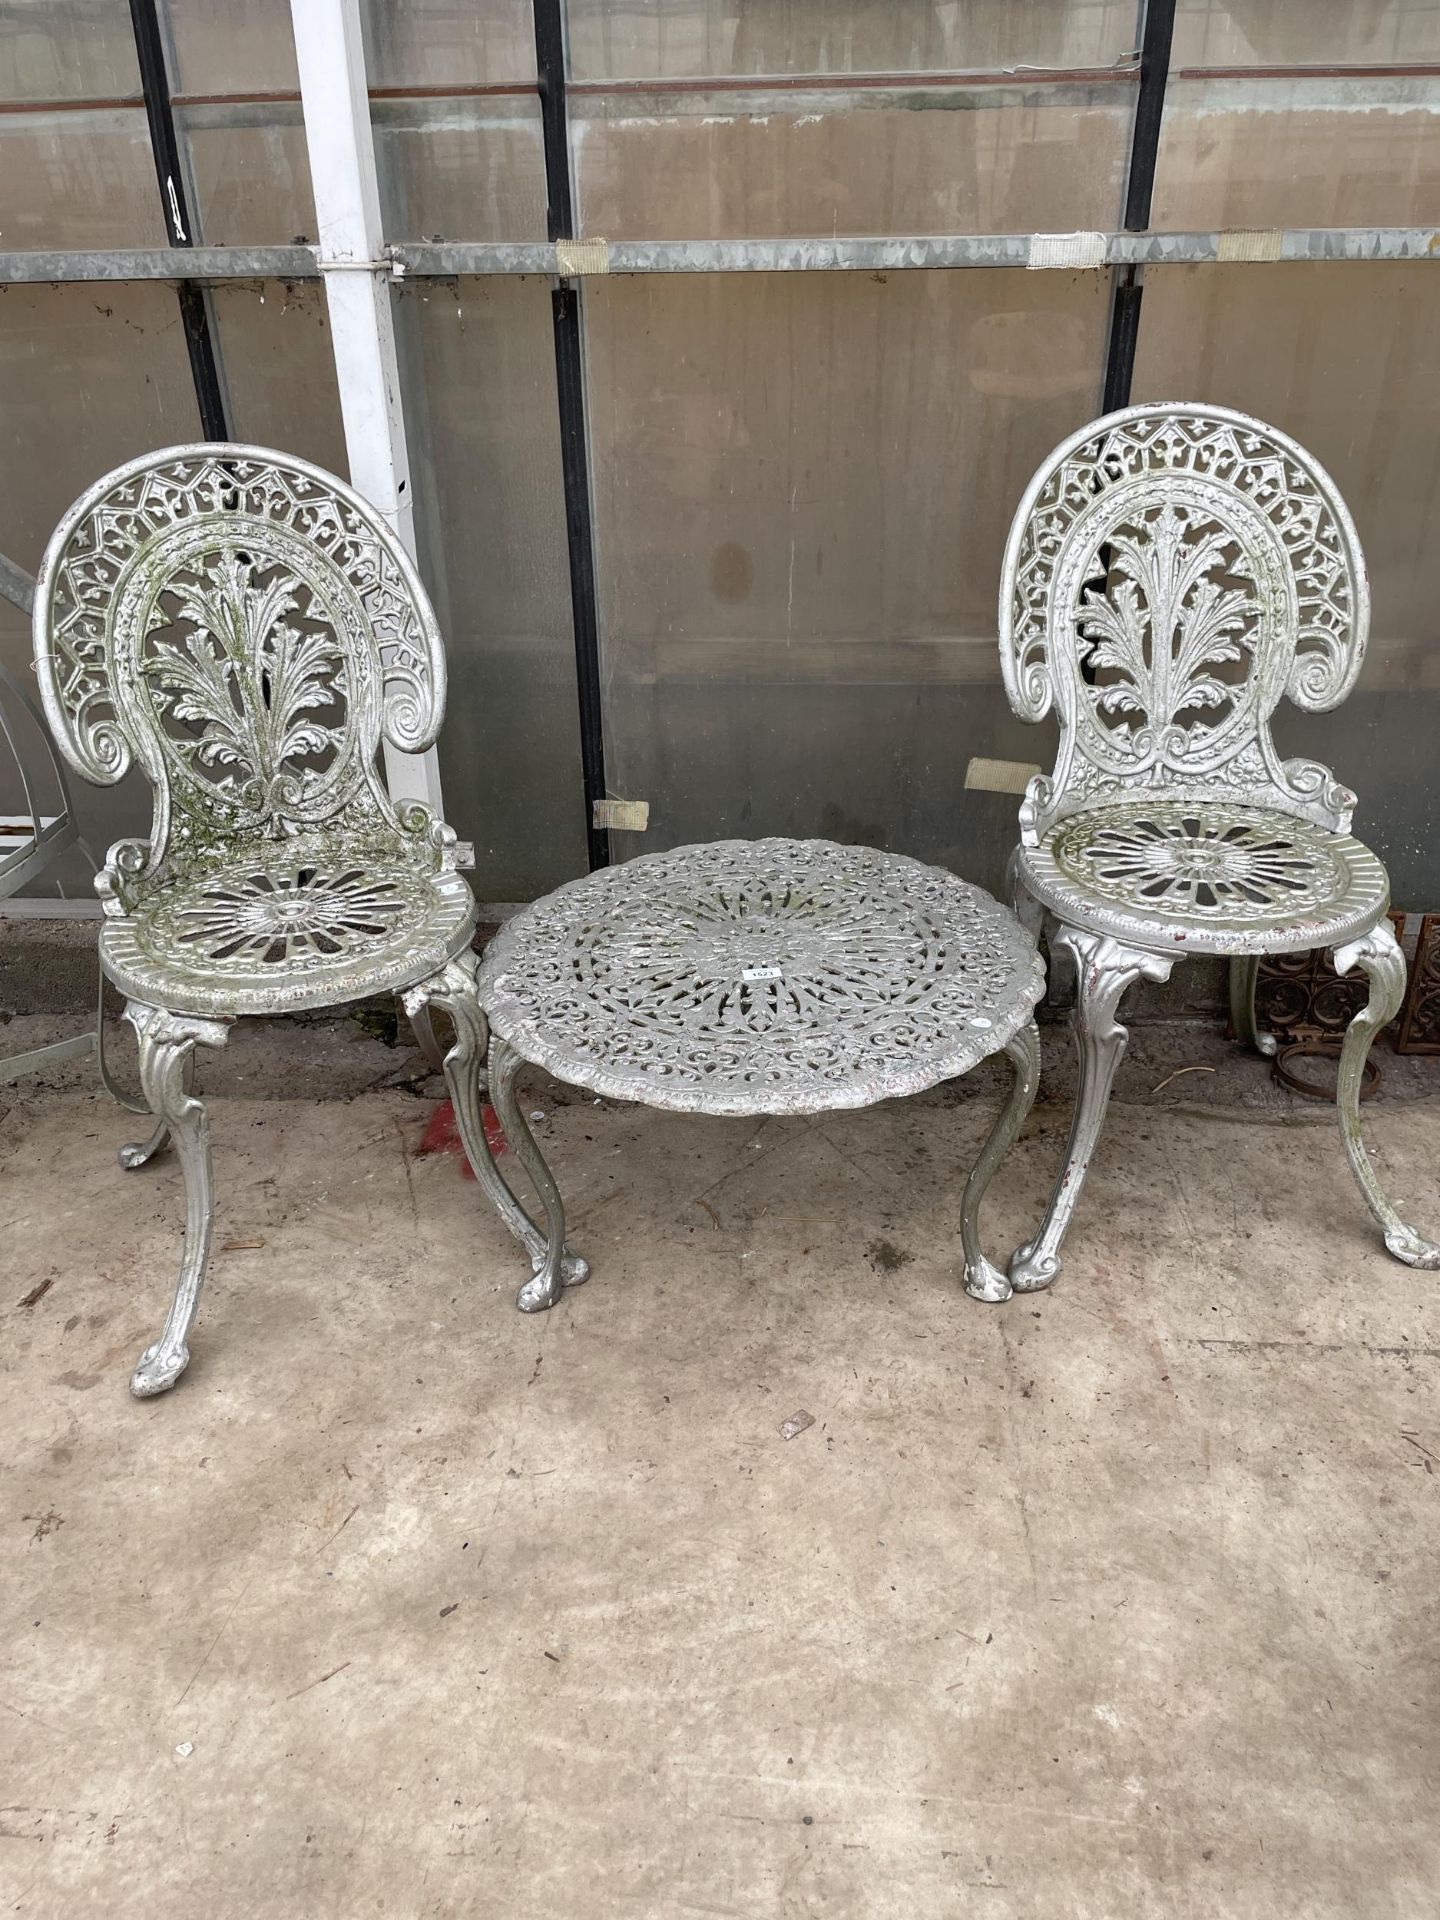 A CAST ALLOY PATIO SET COMPRISING OF TWO CHAIRS AND A ROUND COFFEE TABLE